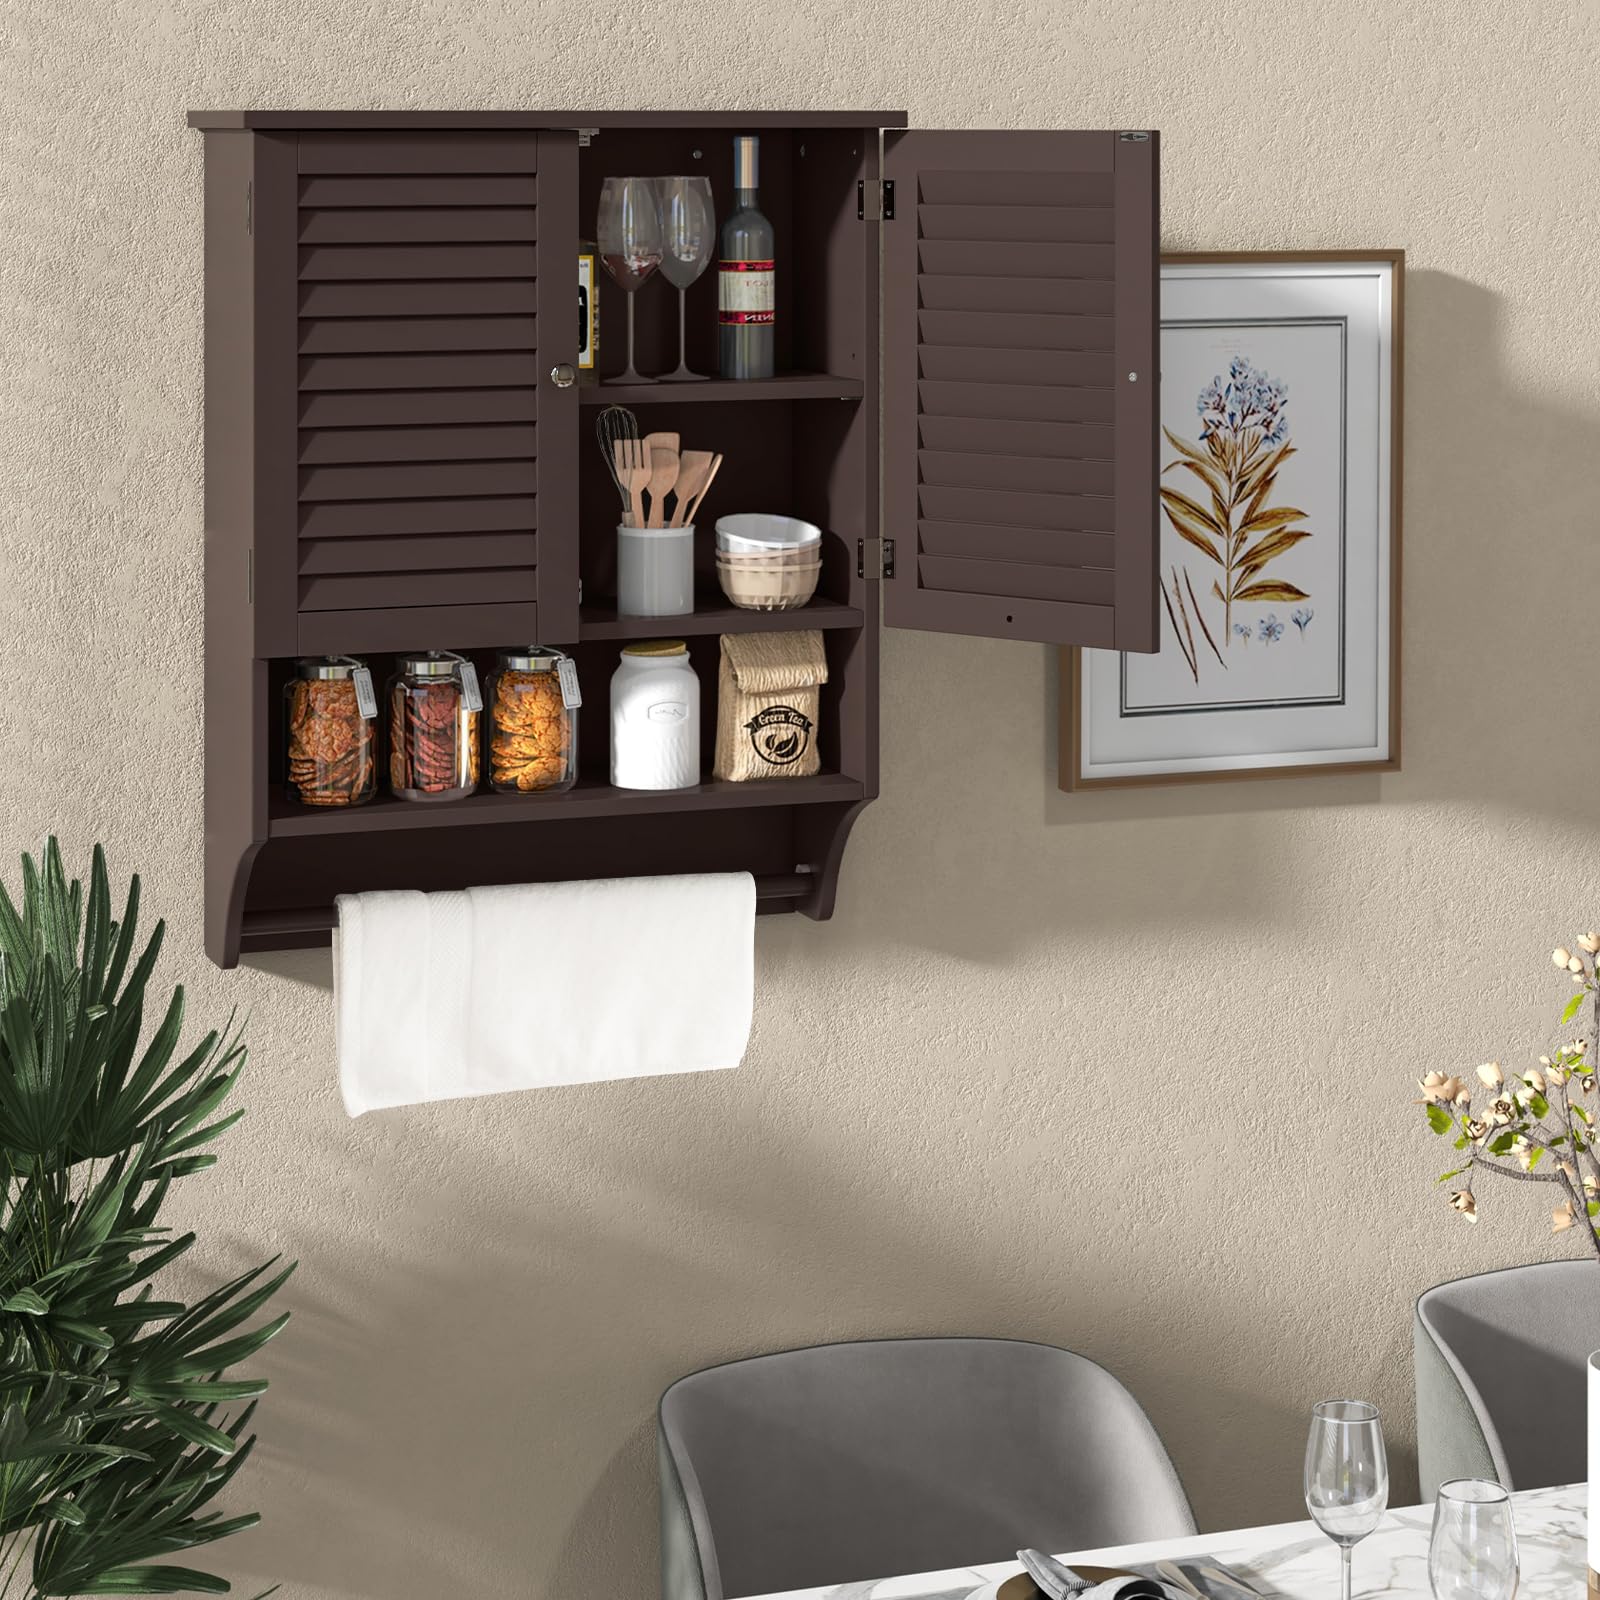 Giantex Bathroom Cabinet Wall Mounted - Hanging Medicine Cabinet with 2 Louvered Doors